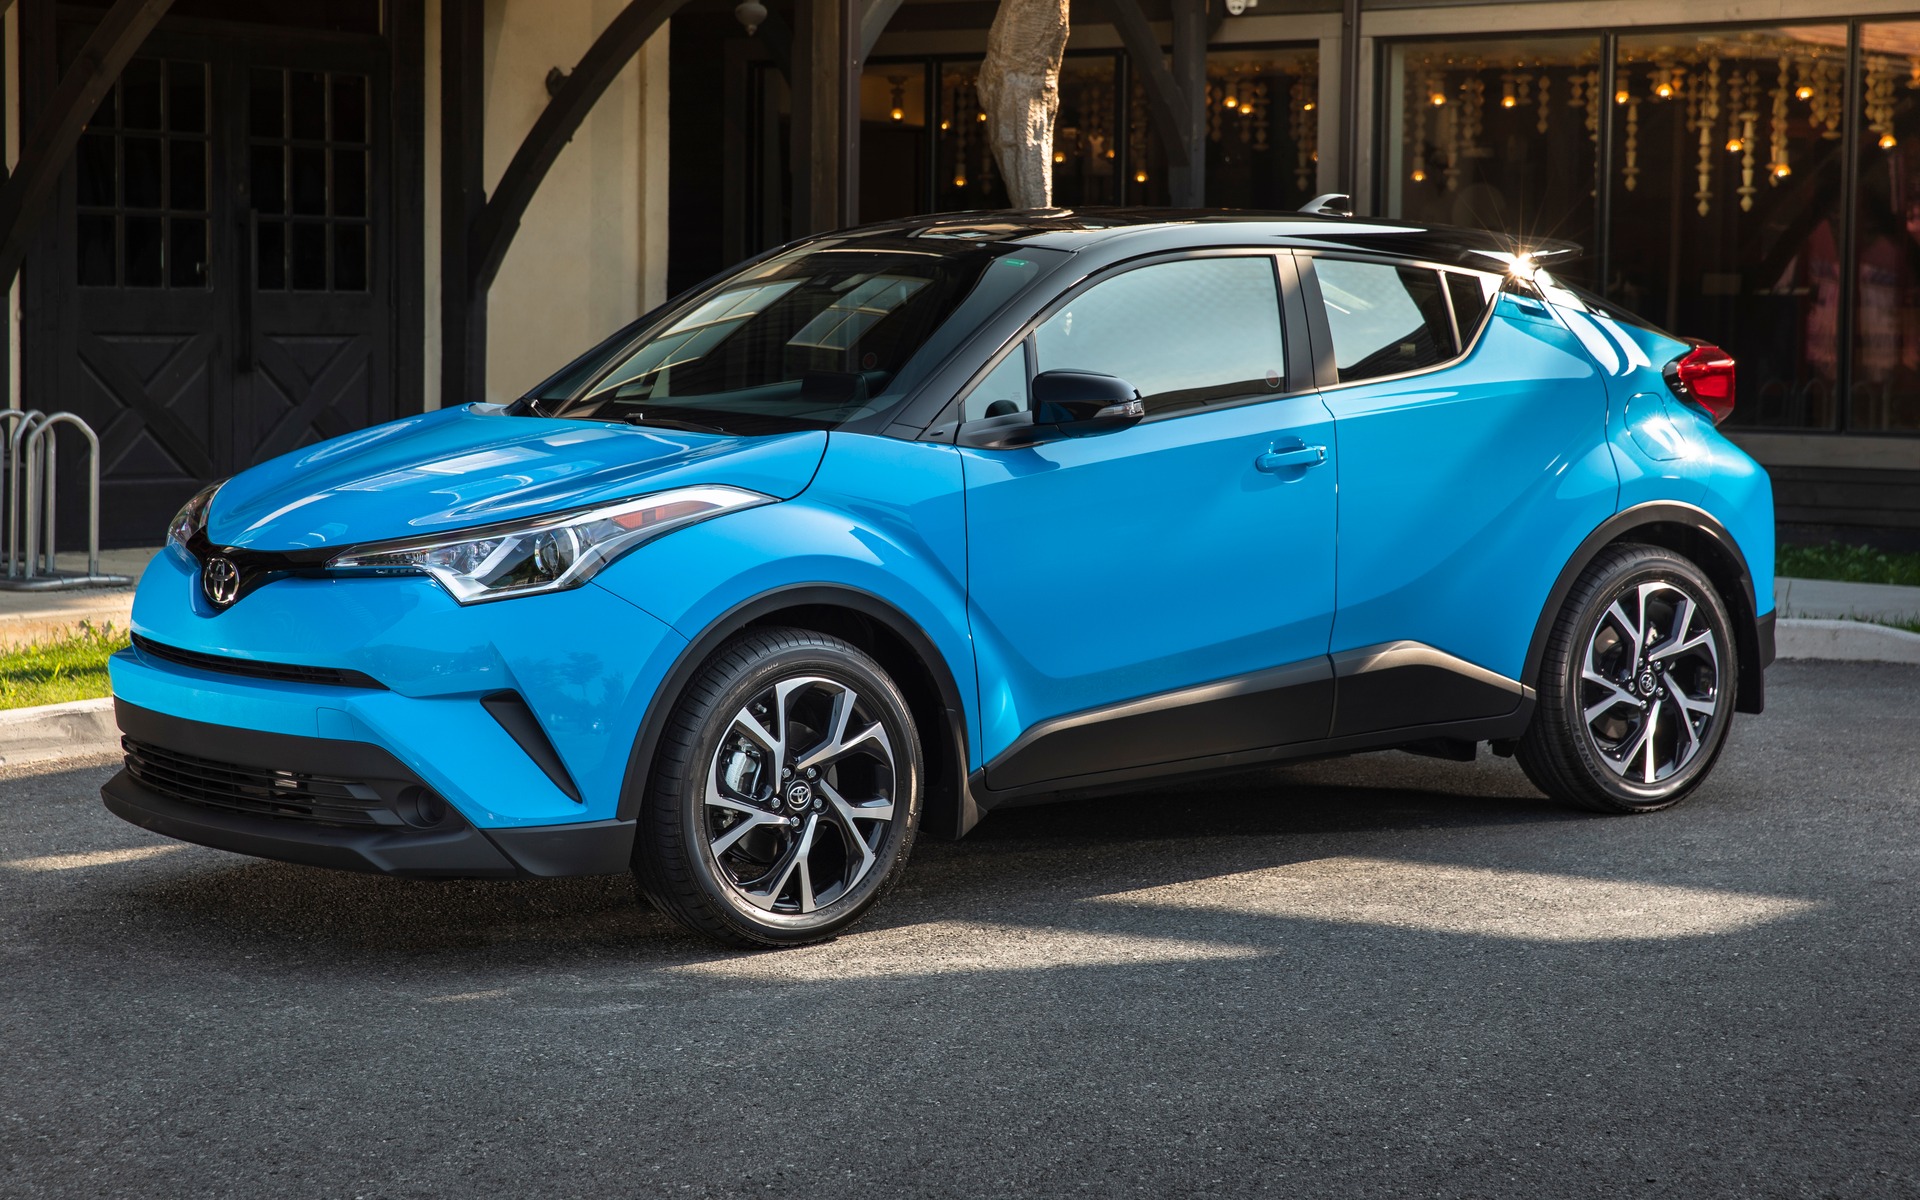 2022 Toyota C-HR Review: A Fairly Desirable Crossover At An Affordable Price